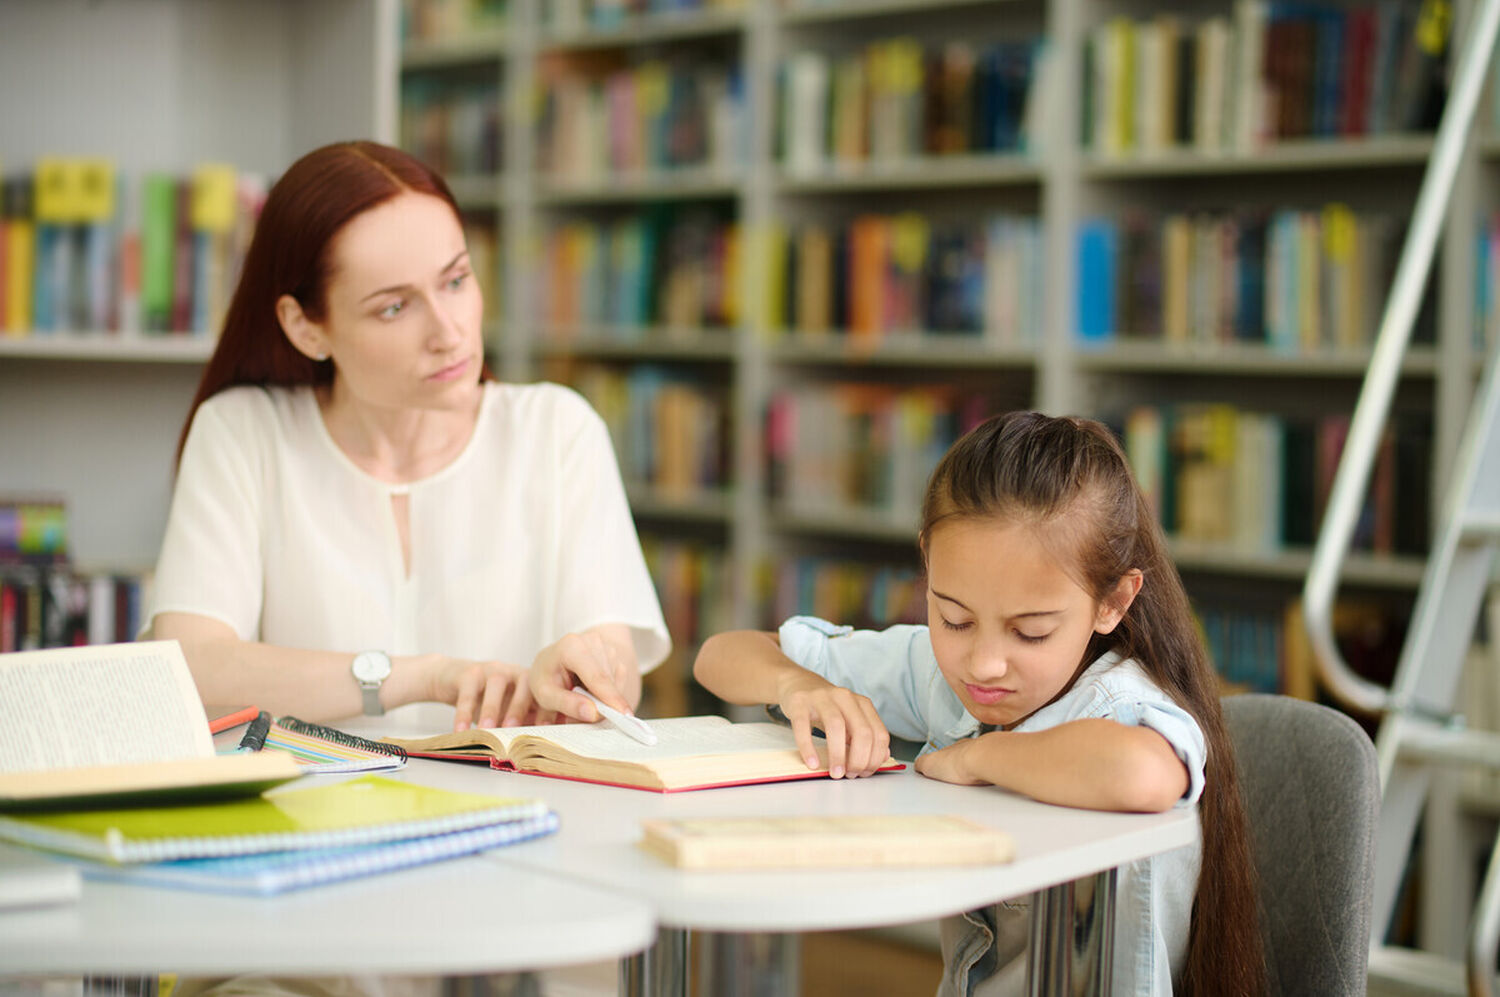 Woman looking at girl refusing to study